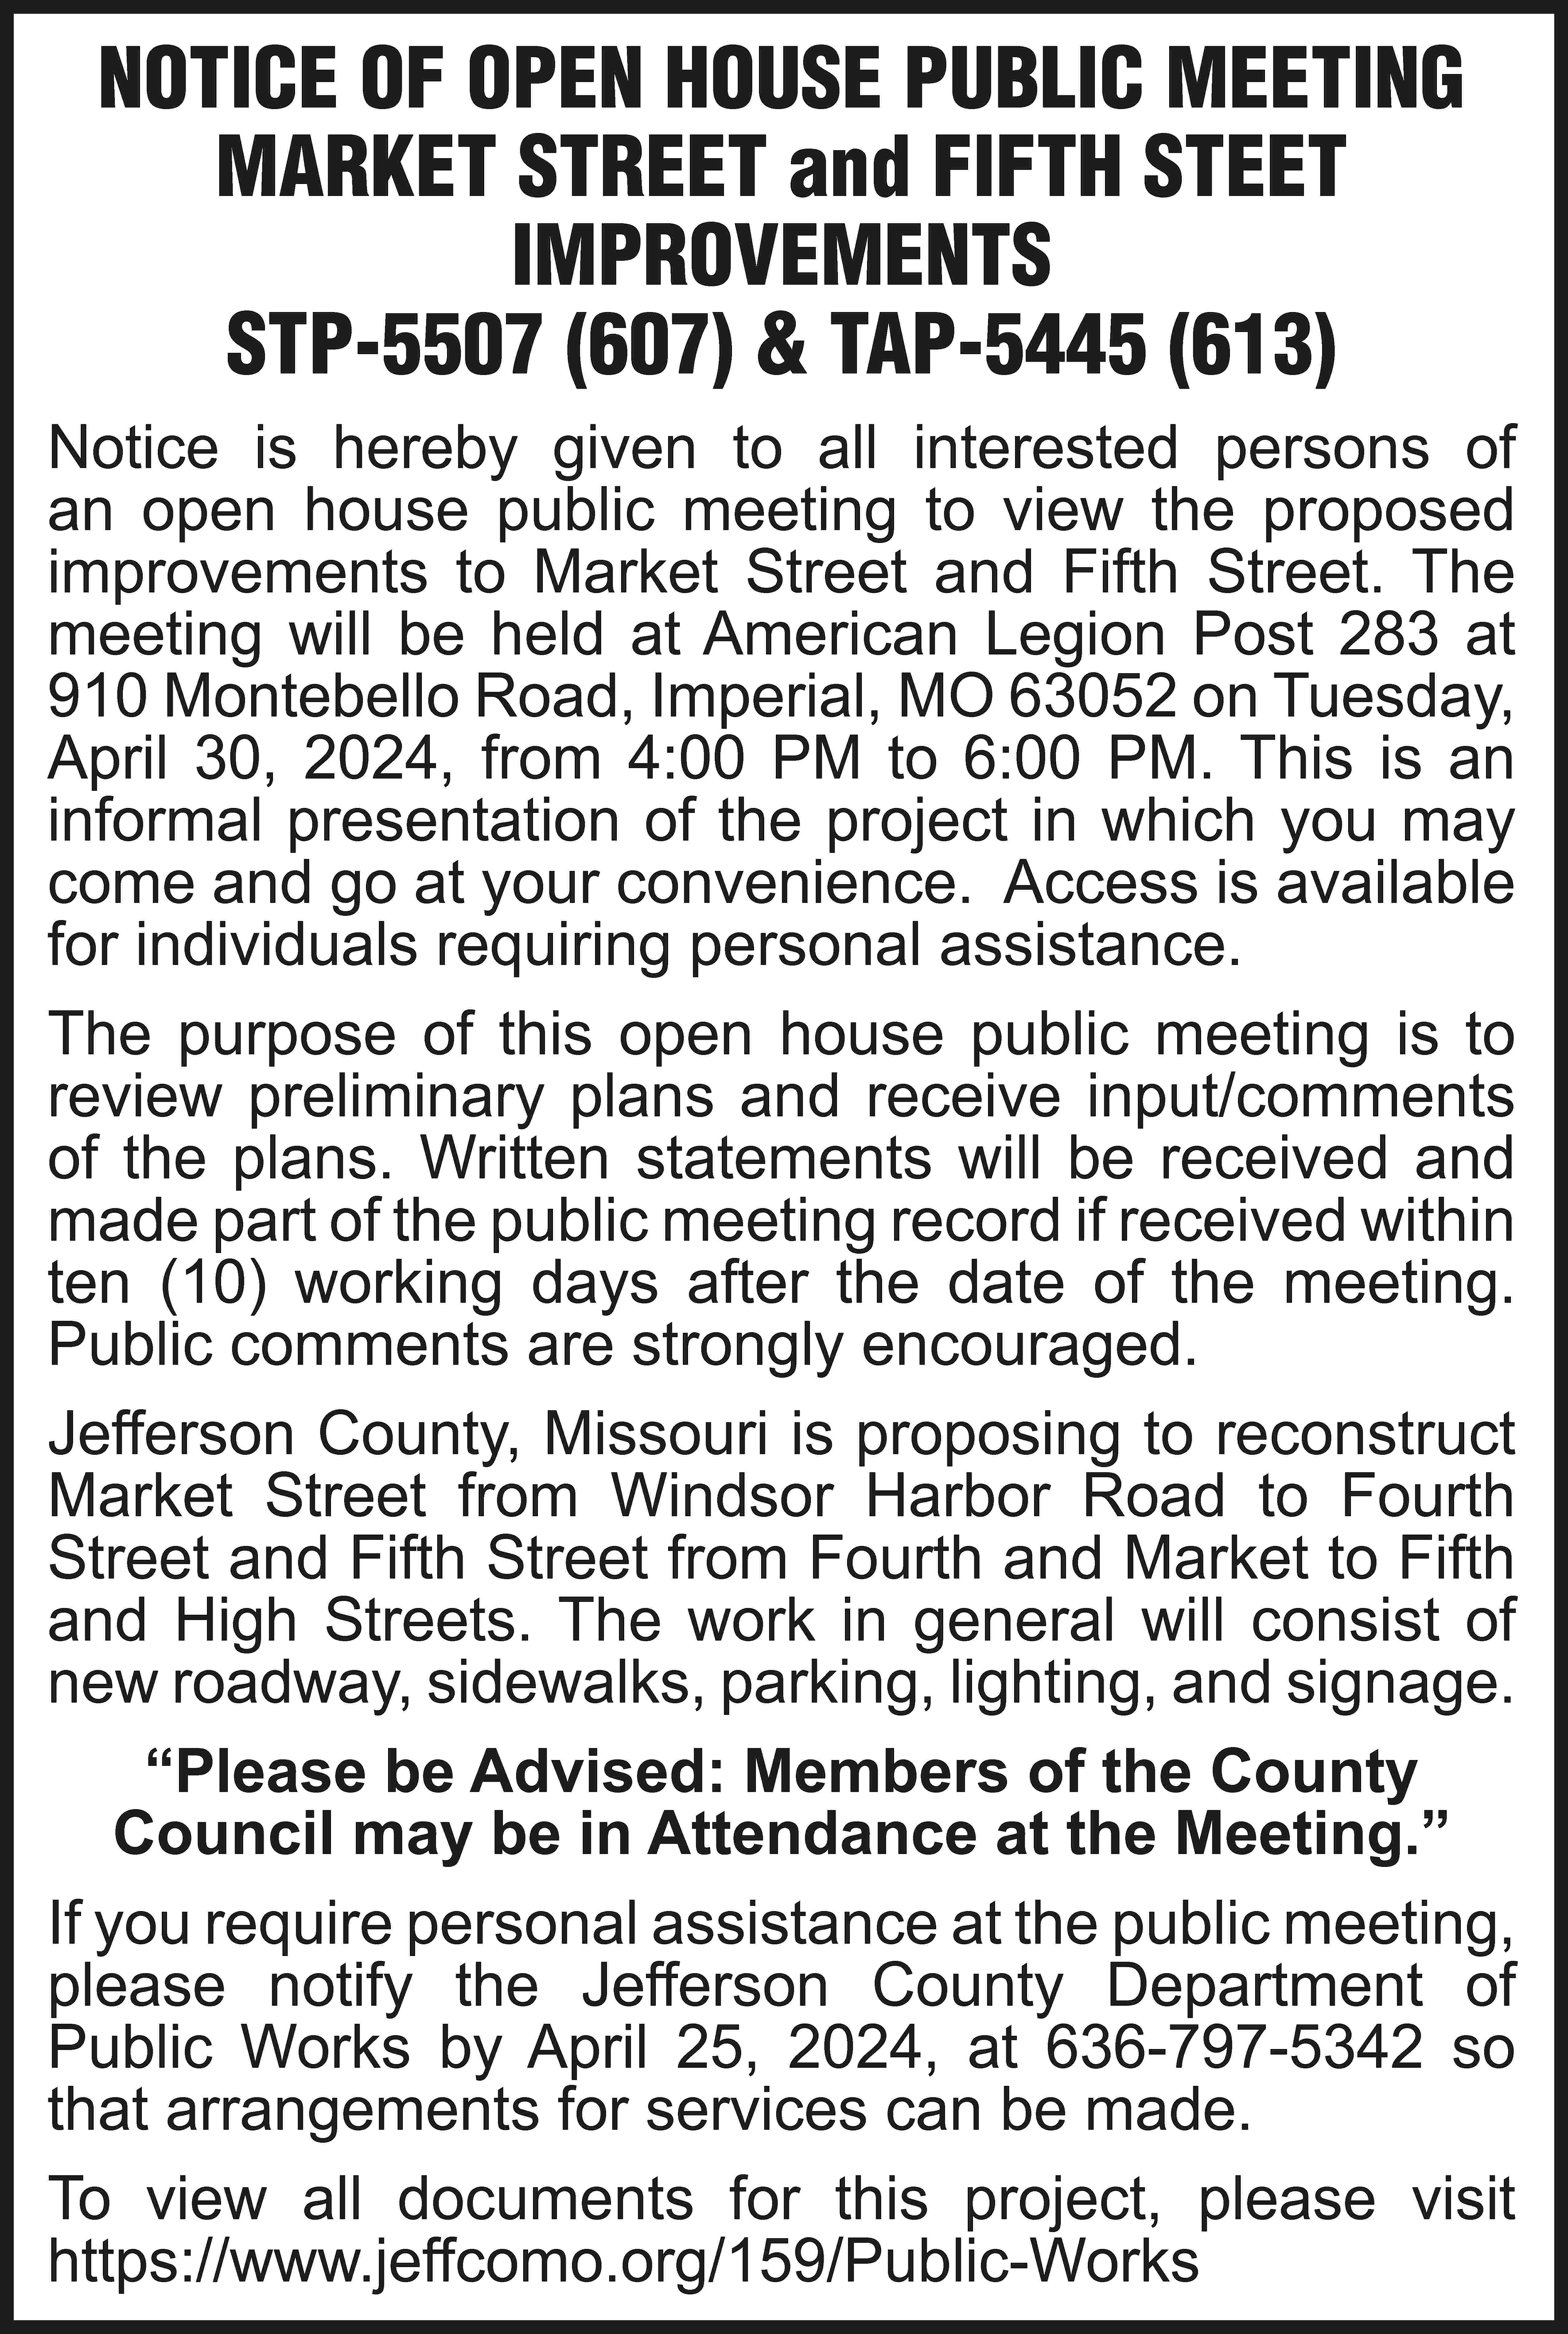 NOTICE OF OPEN HOUSE PUBLIC  NOTICE OF OPEN HOUSE PUBLIC MEETING MARKET STREET and FIFTH STEET IMPROVEMENTS STP-5507 (607) & TAP-5445 (613) Notice is hereby given to all interested persons of an open house public meeting to view the proposed improvements to Market Street and Fifth Street. The meeting will be held at American Legion Post 283 at 910 Montebello Road, Imperial, MO 63052 on Tuesday, April 30, 2024, from 4:00 PM to 6:00 PM. This is an informal presentation of the project in which you may come and go at your convenience. Access is available for individuals requiring personal assistance. The purpose of this open house public meeting is to review preliminary plans and receive input/comments of the plans. Written statements will be received and made part of the public meeting record if received within ten (10) working days after the date of the meeting. Public comments are strongly encouraged. Jefferson County, Missouri is proposing to reconstruct Market Street from Windsor Harbor Road to Fourth Street and Fifth Street from Fourth and Market to Fifth and High Streets. The work in general will consist of new roadway, sidewalks, parking, lighting, and signage. “Please be Advised: Members of the County Council may be in Attendance at the Meeting.” If you require personal assistance at the public meeting, please notify the Jefferson County Department of Public Works by April 25, 2024, at 636-797-5342 so that arrangements for services can be made. To view all documents for this project, please visit https://www.jeffcomo.org/159/Public-Works